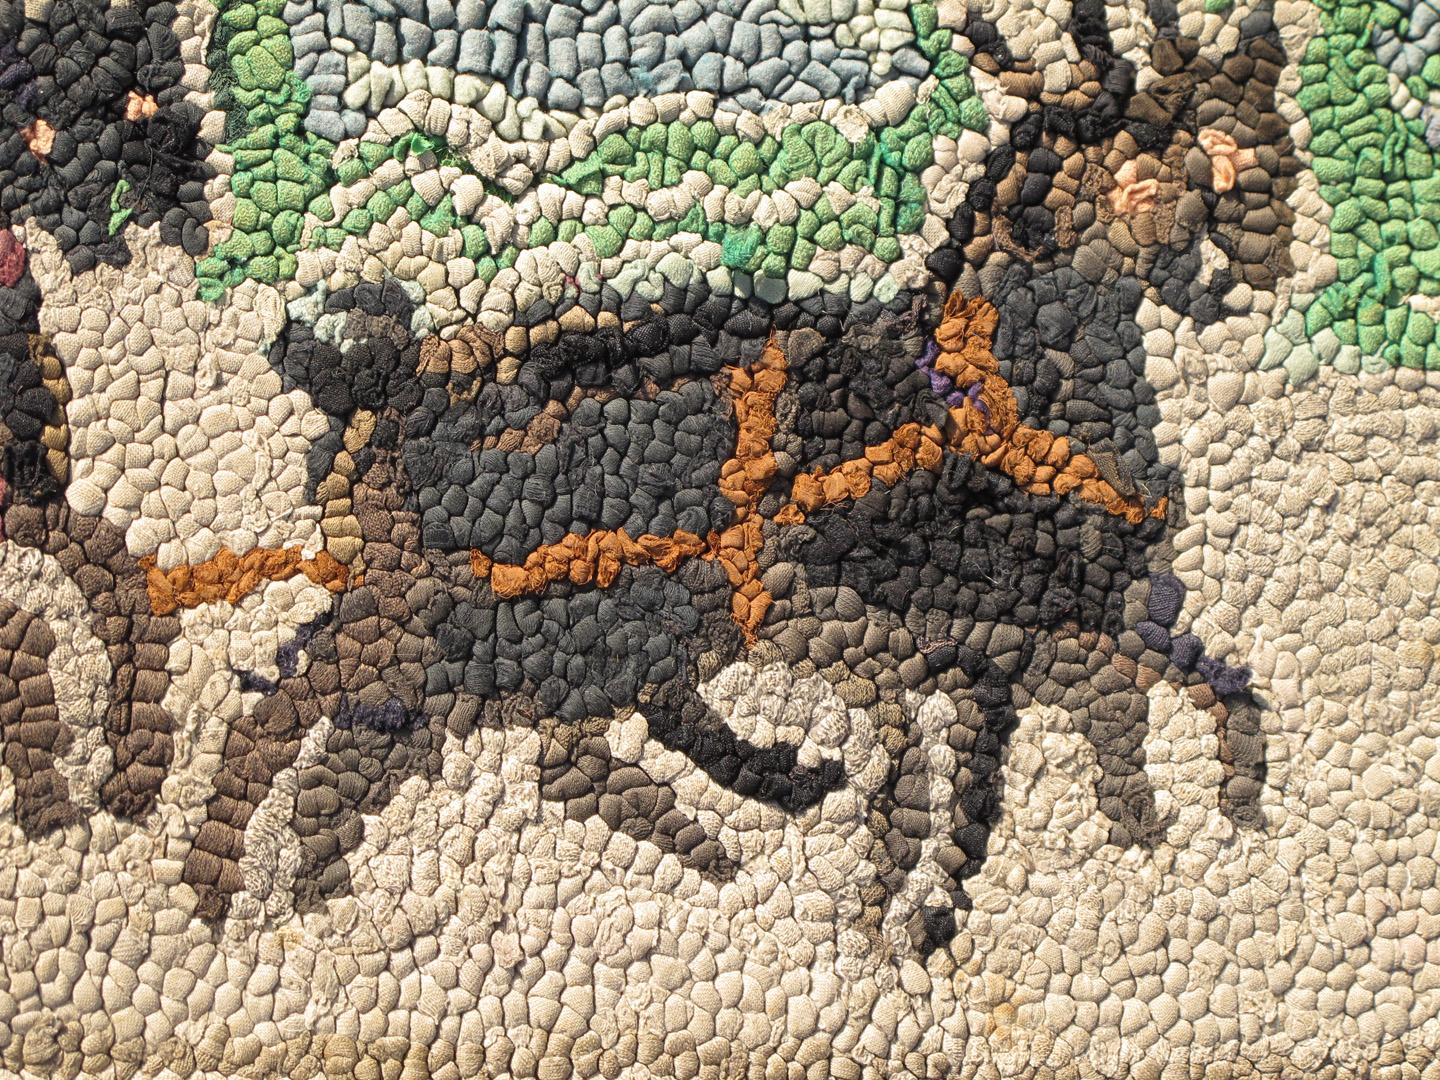 Purple, black, orange, green, brown and light tones in this antique American hooked rug with horse and buggy, rug H8-1104, country of origin / type: United States / Hooked, circa 1930

This colorful American hooked rug depicts a colonial horse and